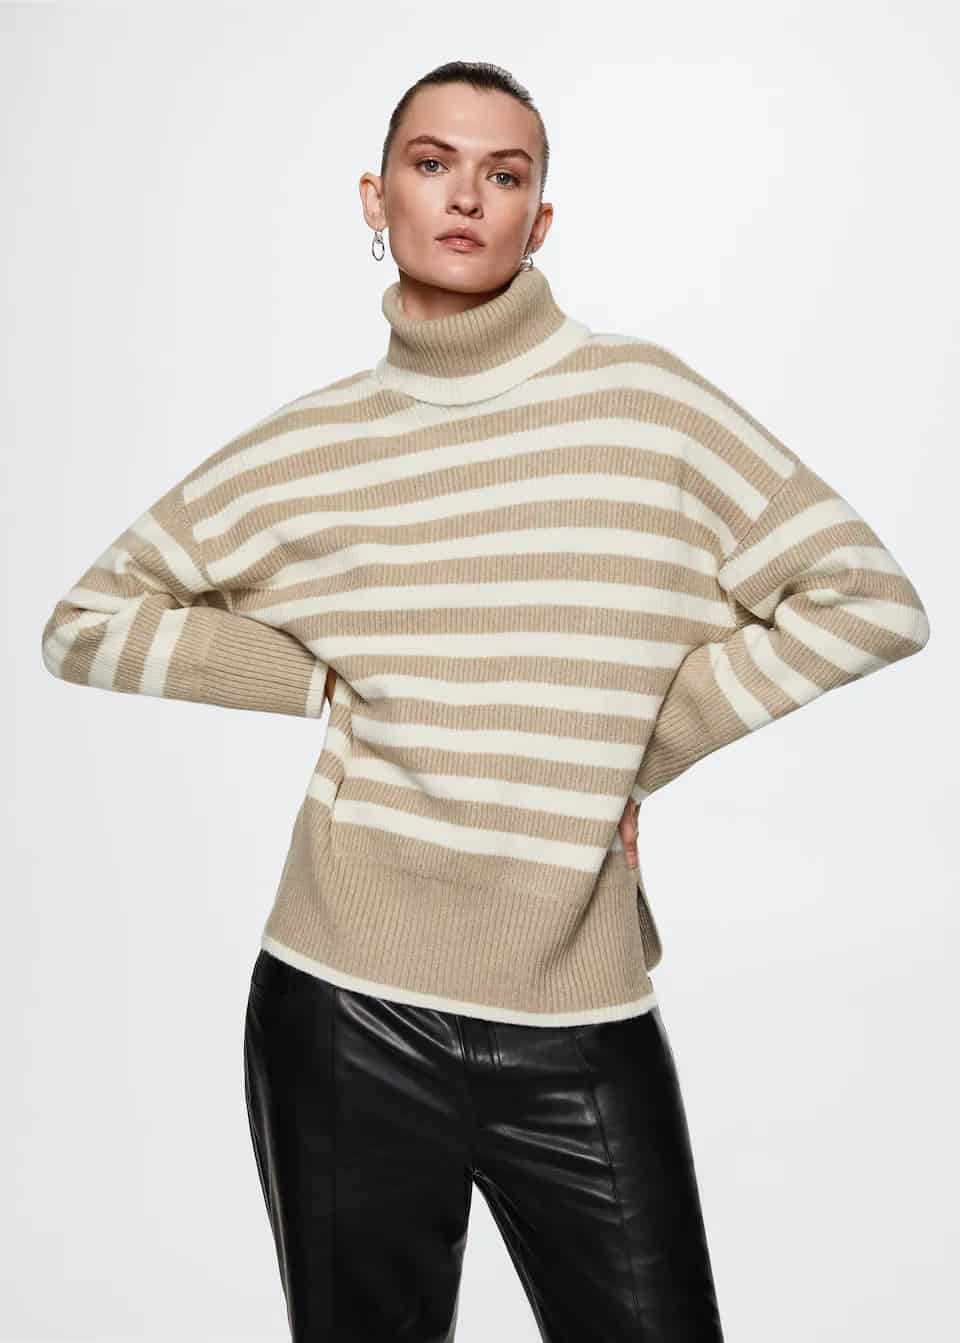 A toteme white and beige striped sweater dupe from mango